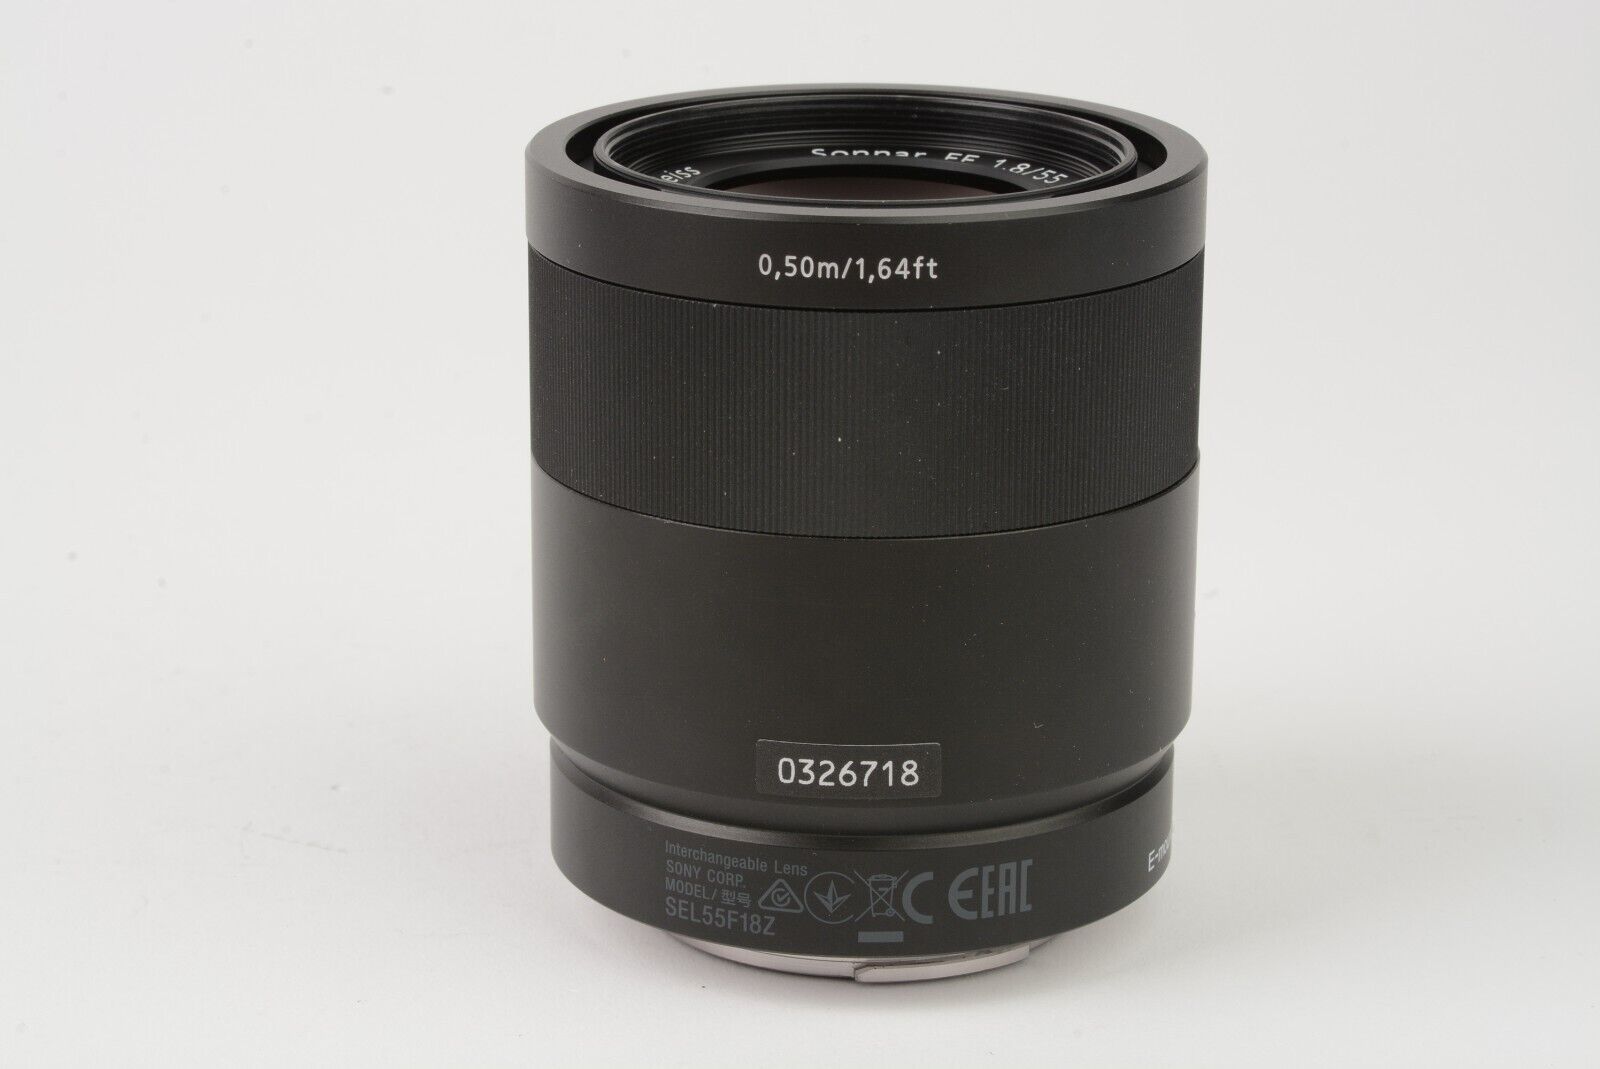 MINT SONY ZEISS SONNAR T* FE 55mm F1.8 ZA LENS, BOXED, USA, POUCH